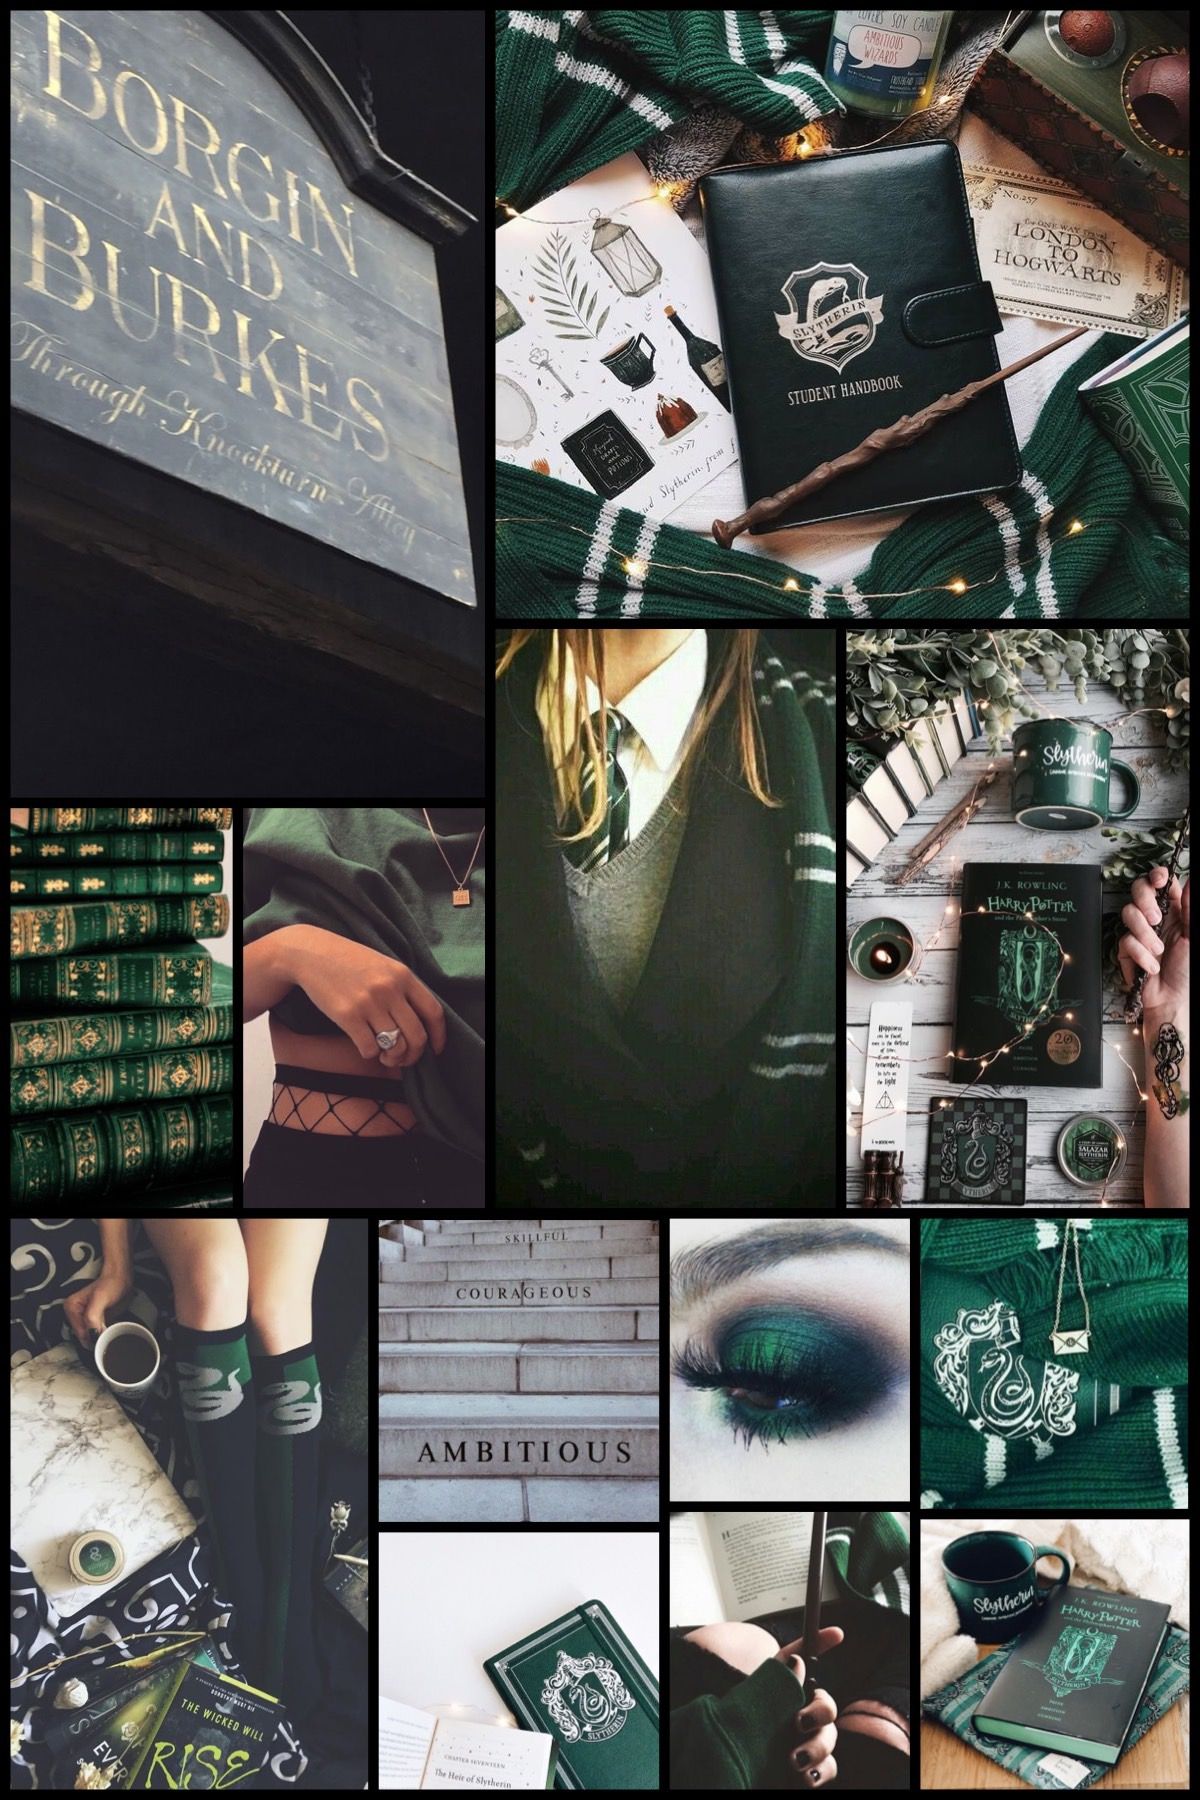 Aesthetic Harry Potter Slytherin Wallpapers - Wallpaper Cave